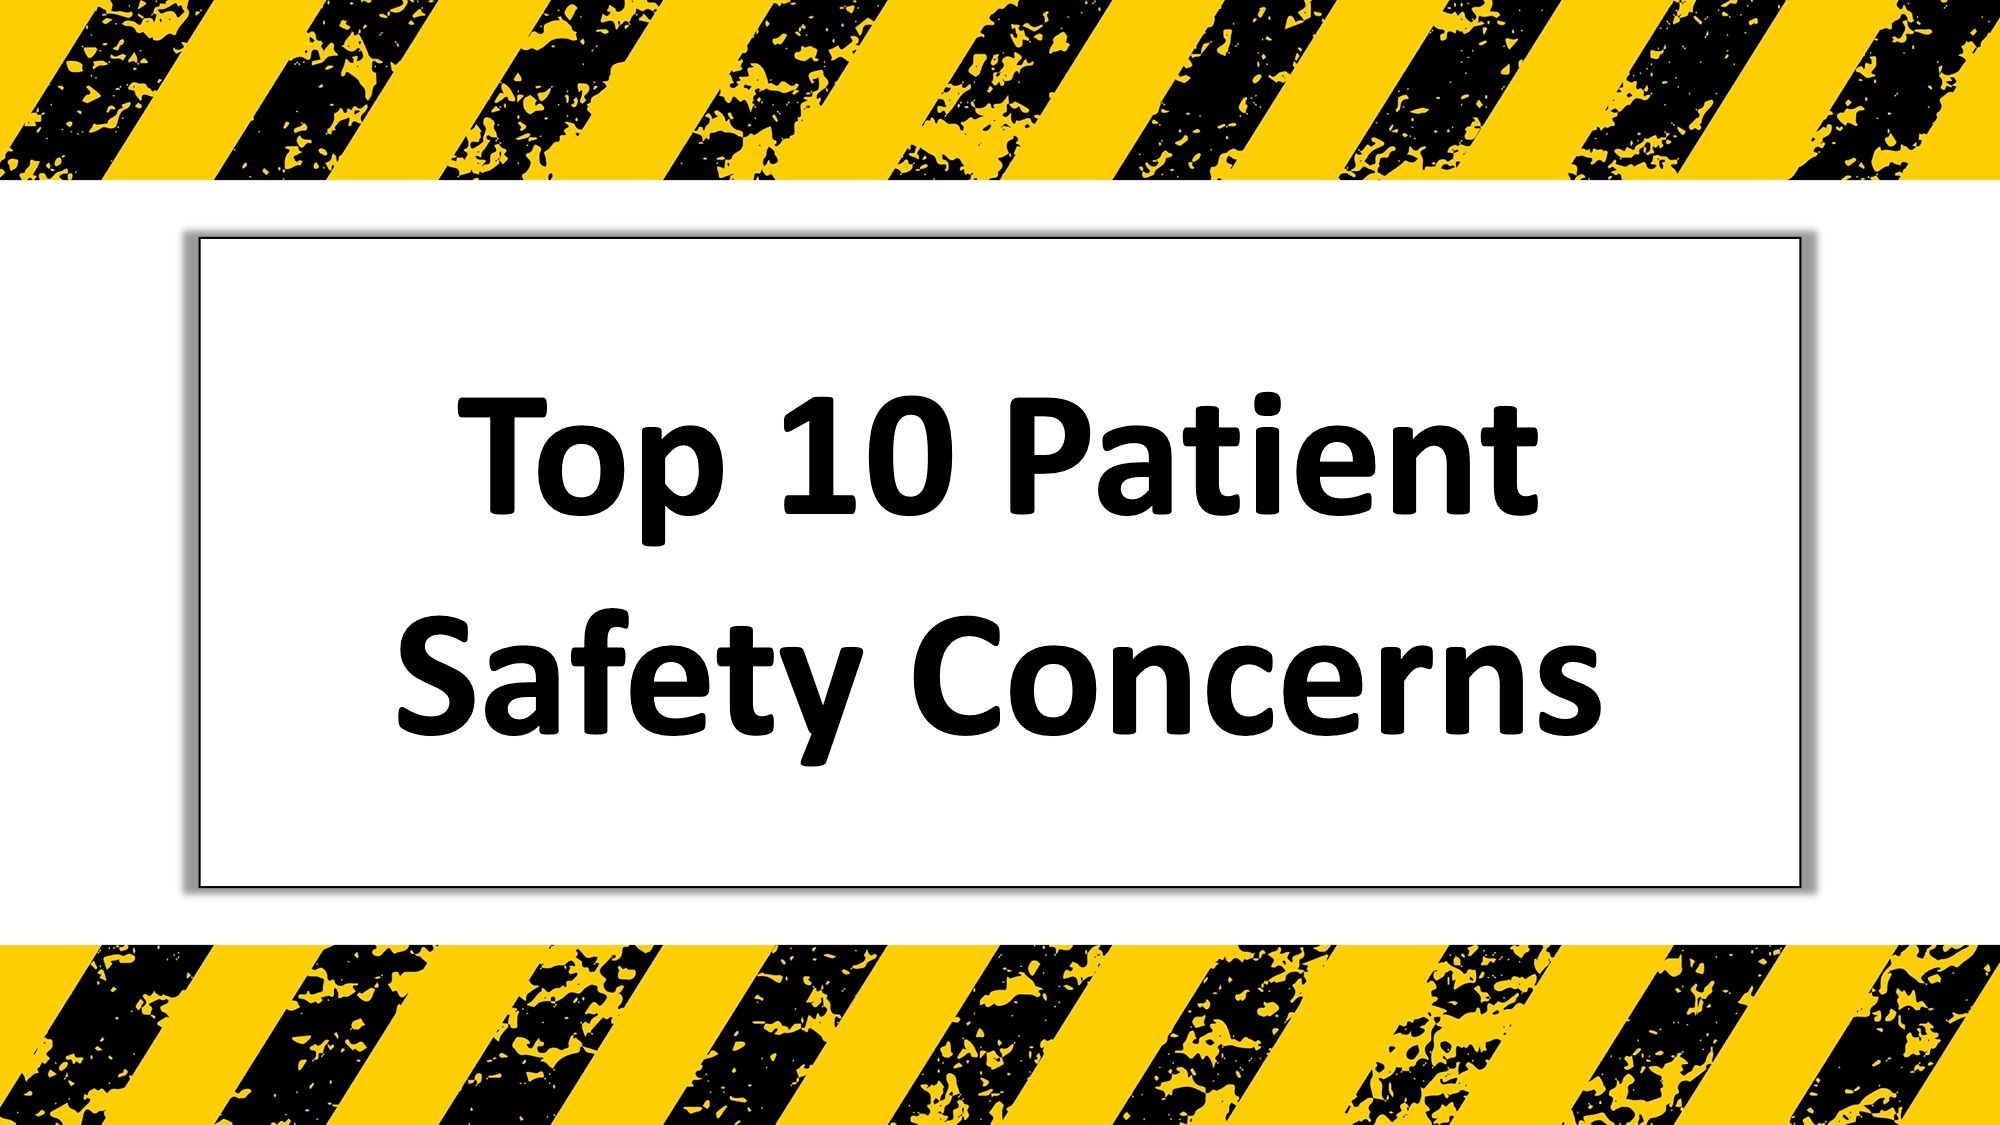 Top 10 Patient Safety Concerns